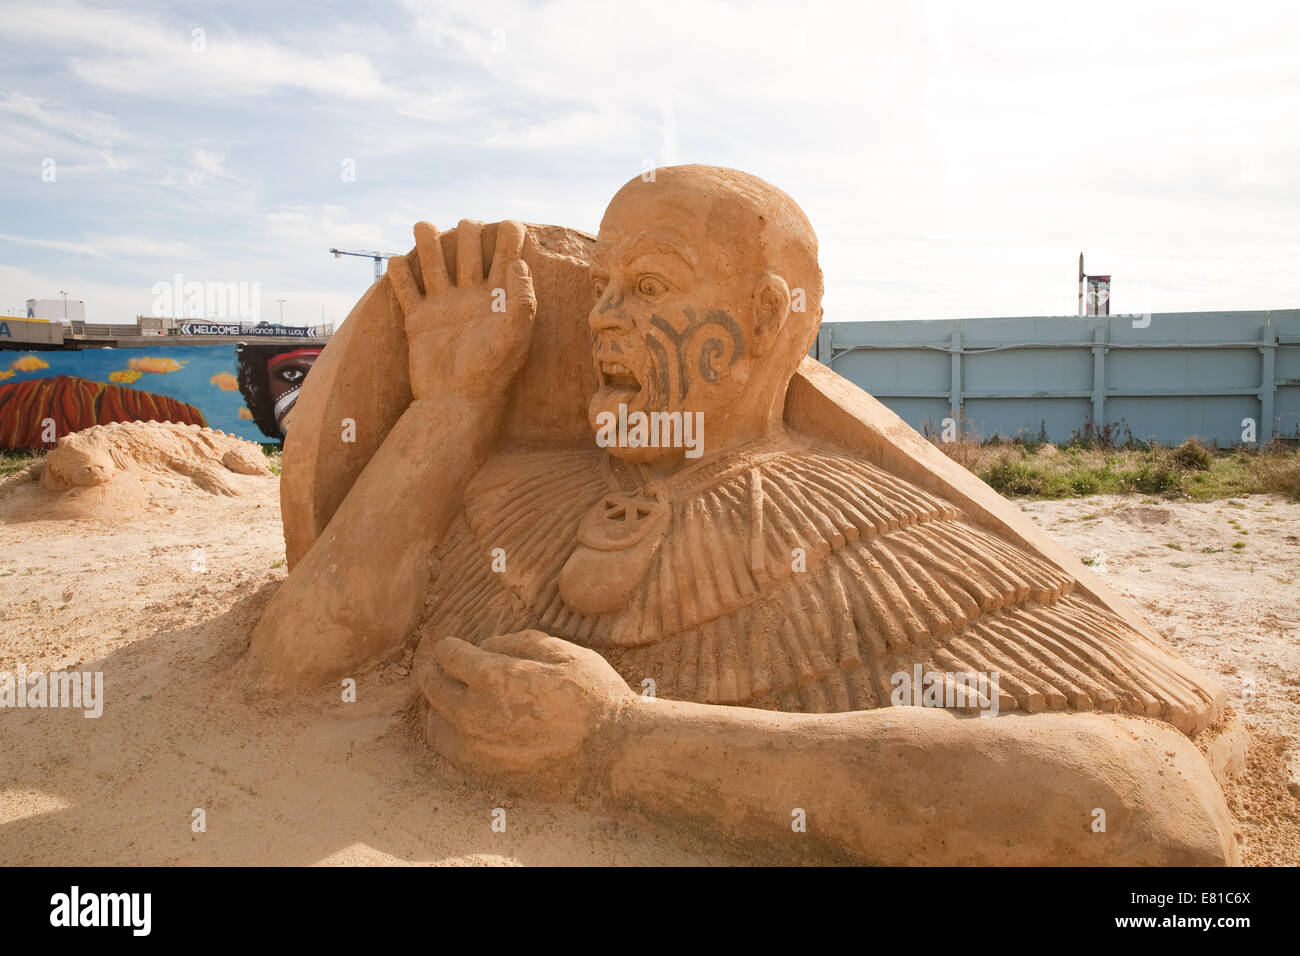 Maori Haka from New Zealand on display at the Sand Sculpture festival in Brighton Stock Photo